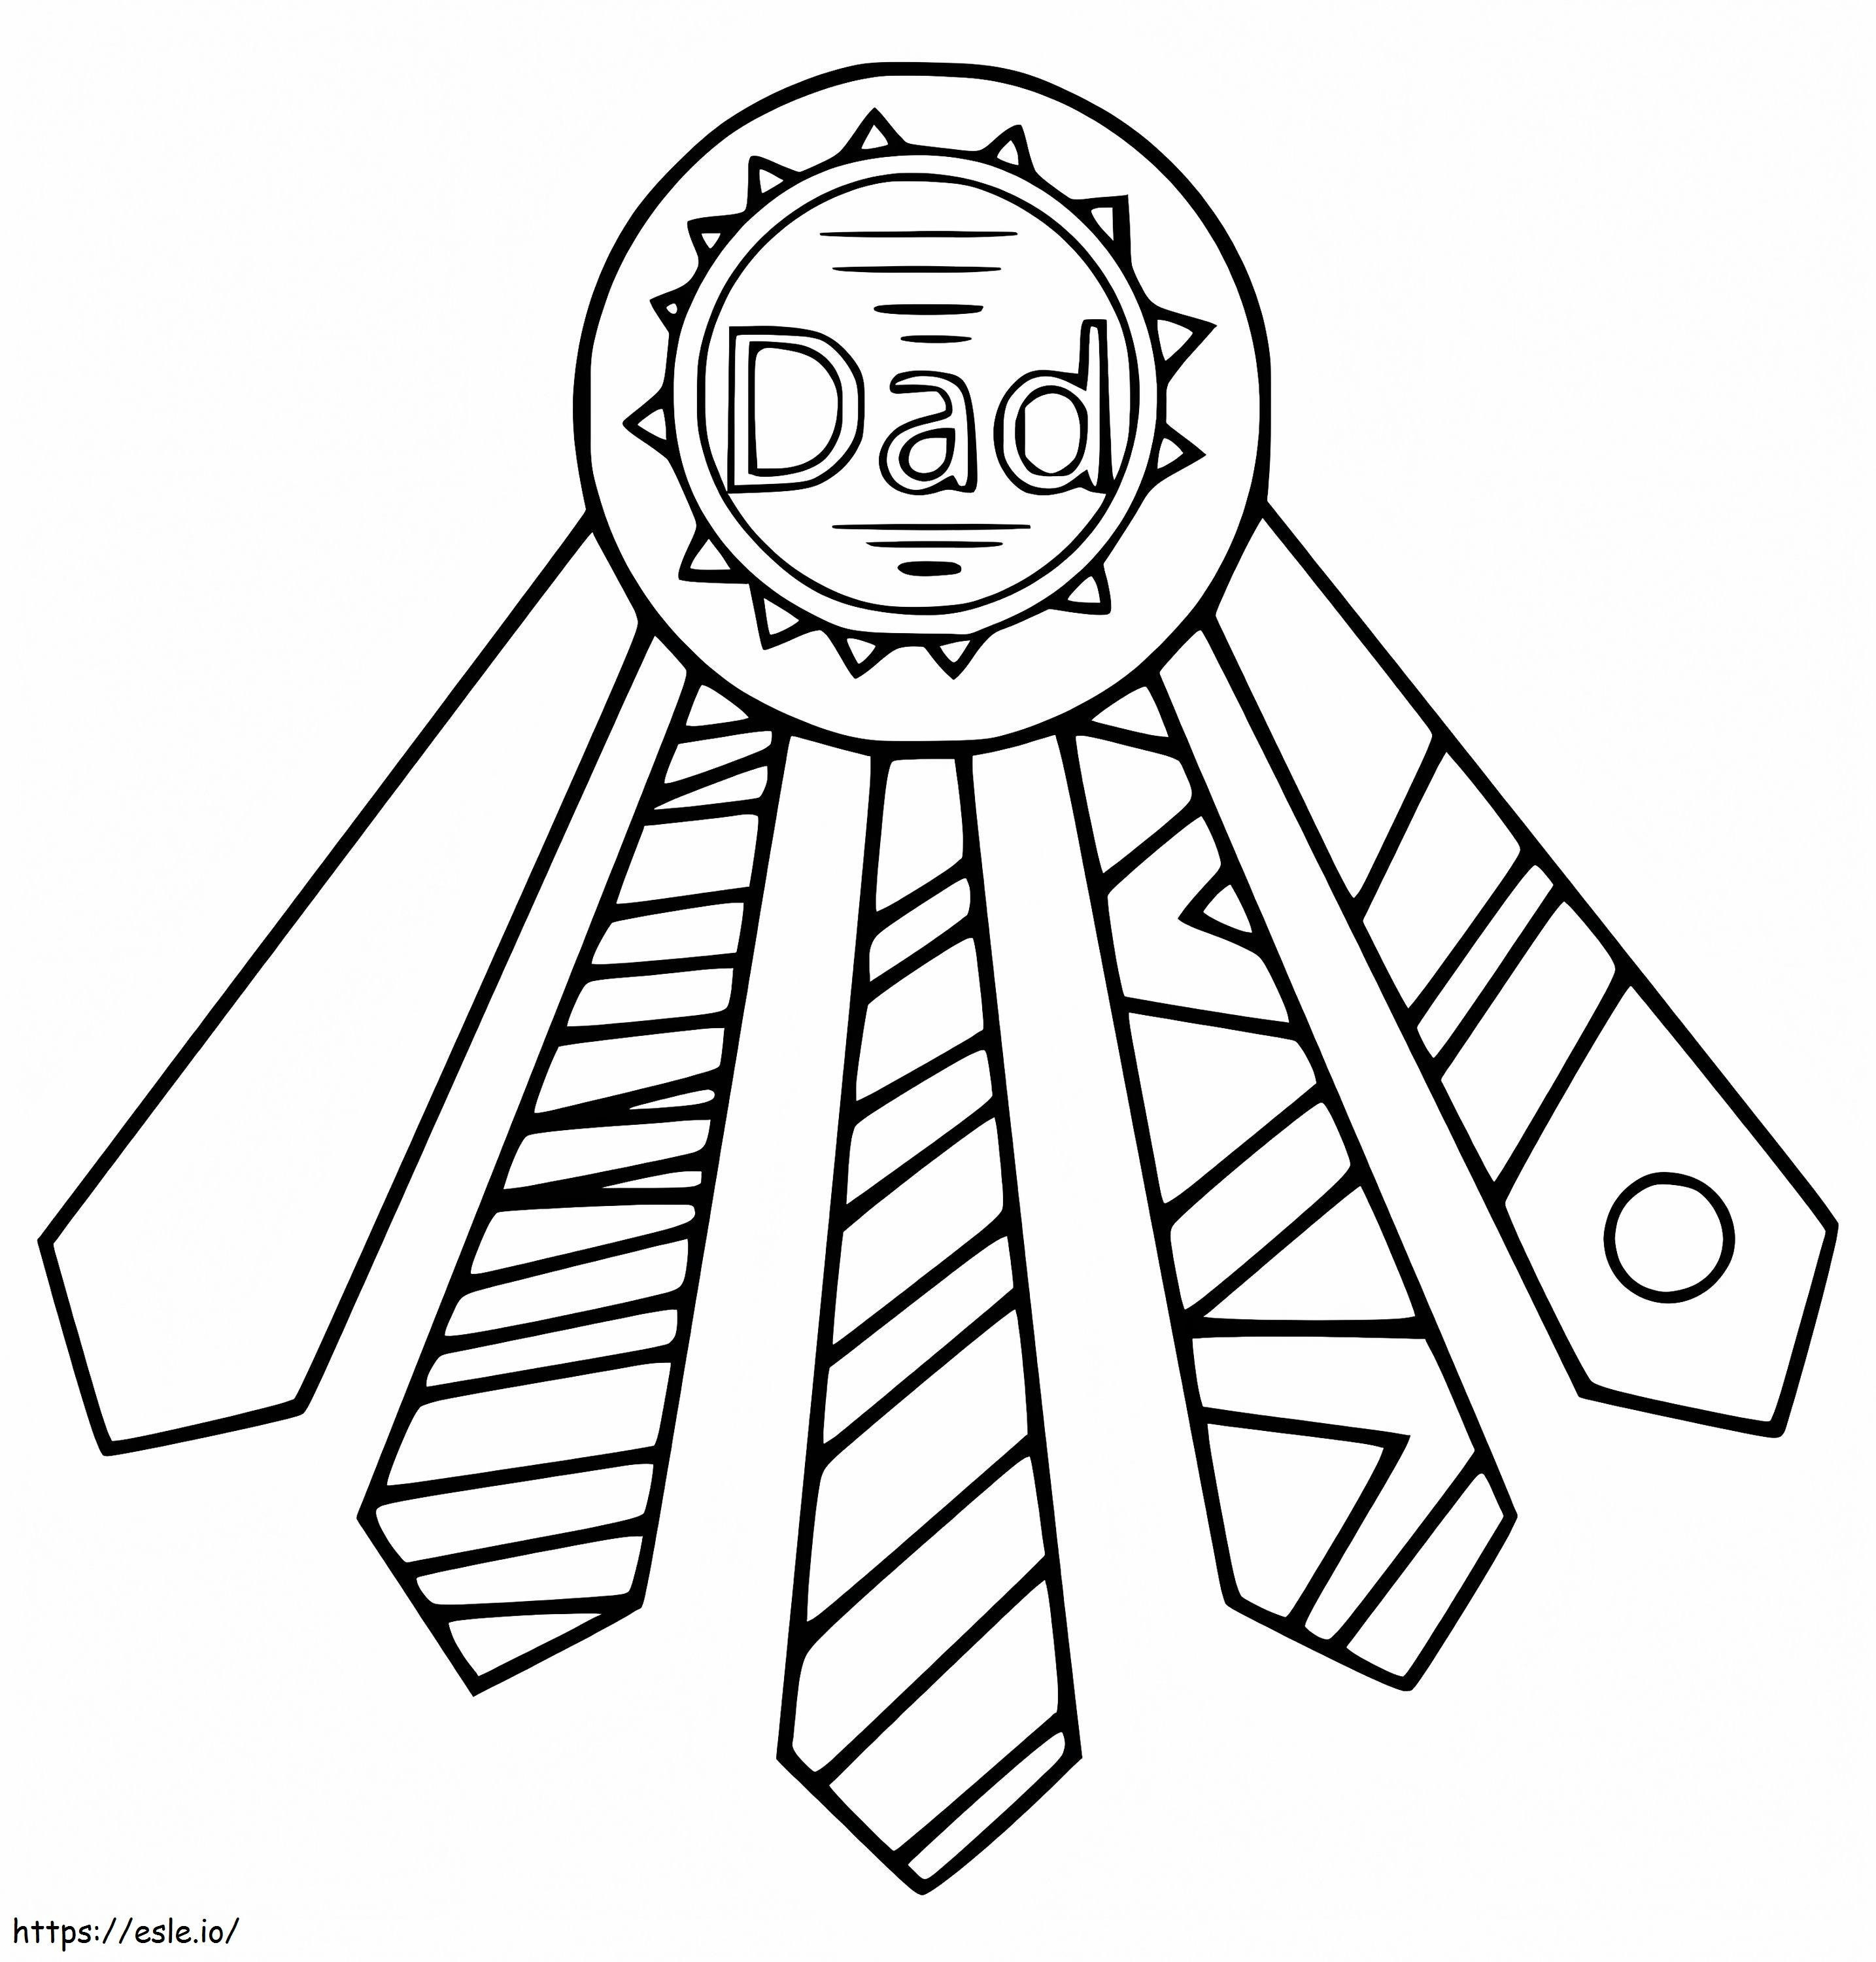 Dad Badge And Five Tie coloring page